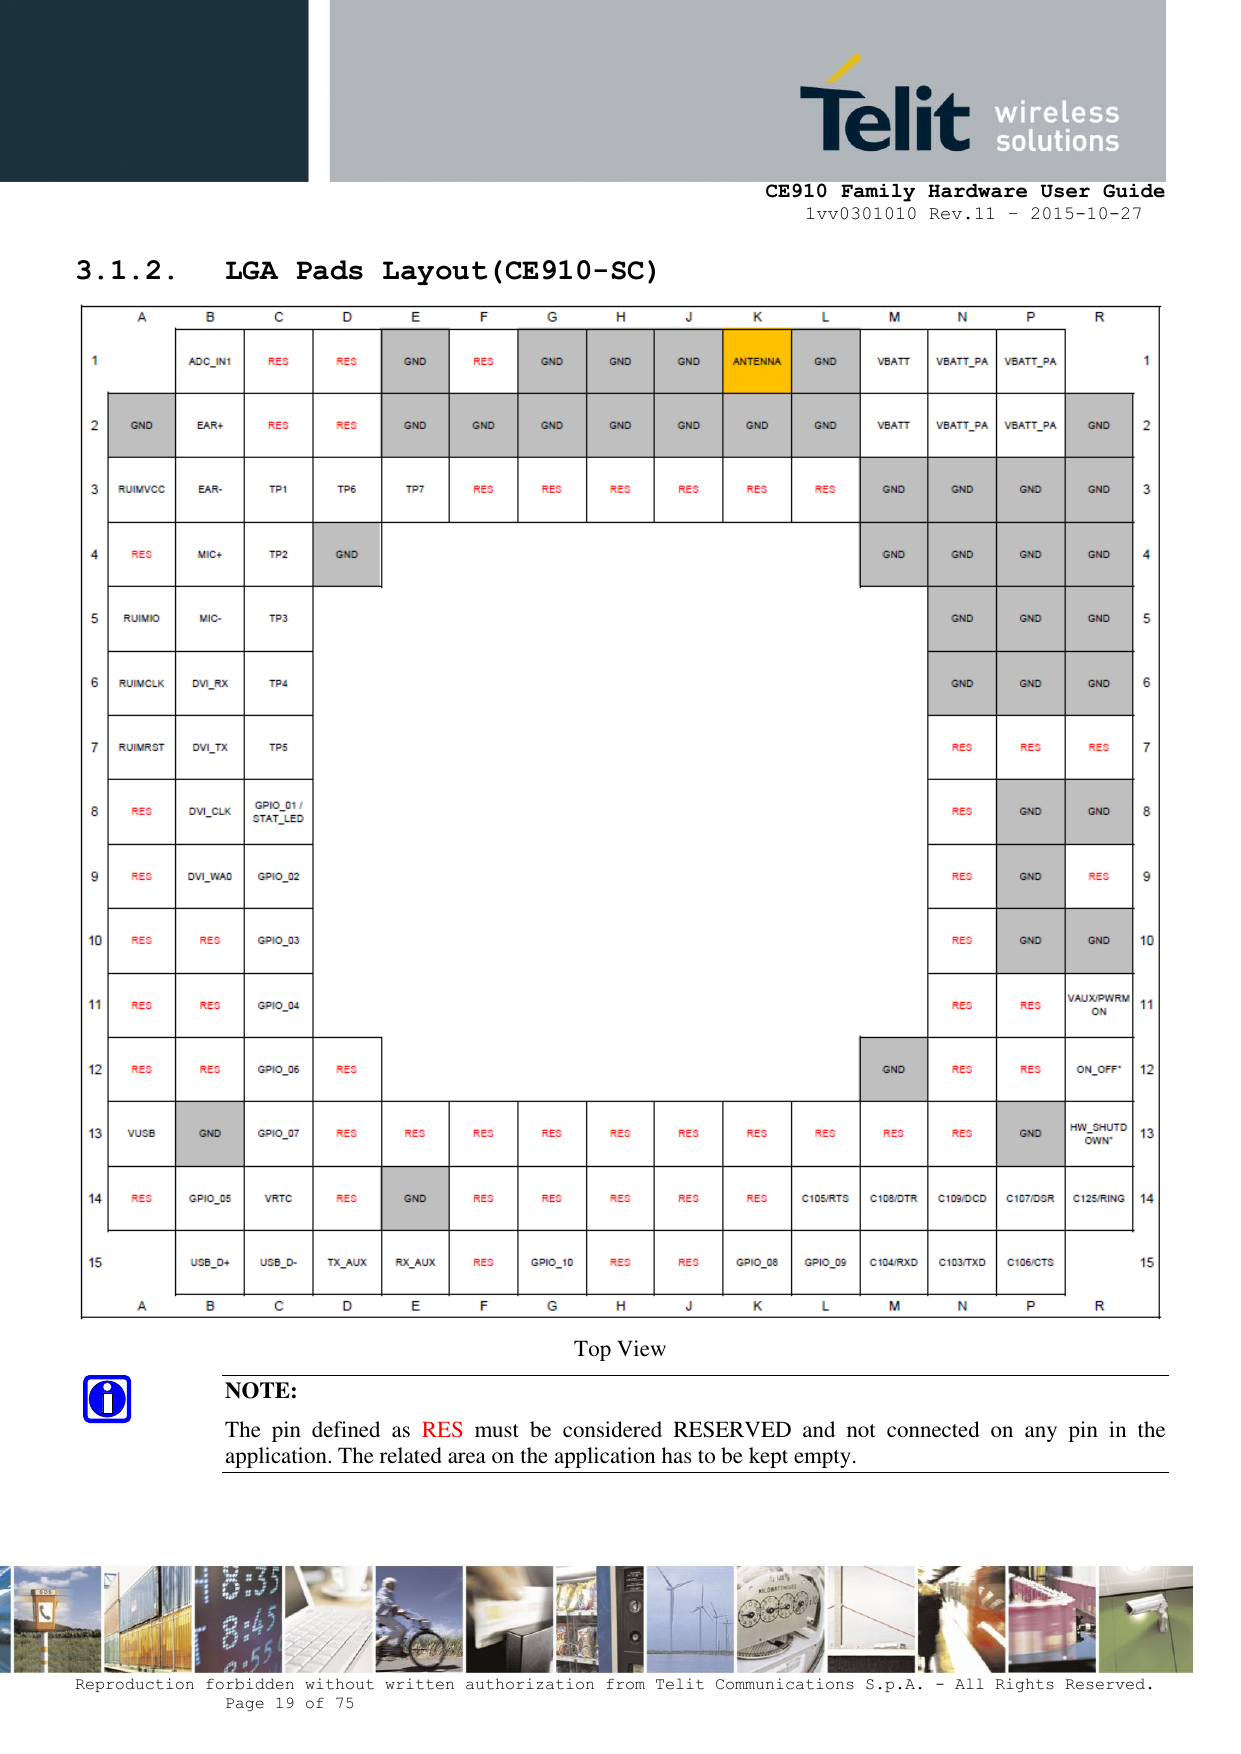     CE910 Family Hardware User Guide 1vv0301010 Rev.11 – 2015-10-27 Reproduction forbidden without written authorization from Telit Communications S.p.A. - All Rights Reserved.    Page 19 of 75                                                     3.1.2. LGA Pads Layout(CE910-SC)  Top View NOTE: The  pin  defined  as  RES  must  be  considered  RESERVED  and  not  connected  on  any  pin  in  the application. The related area on the application has to be kept empty. 